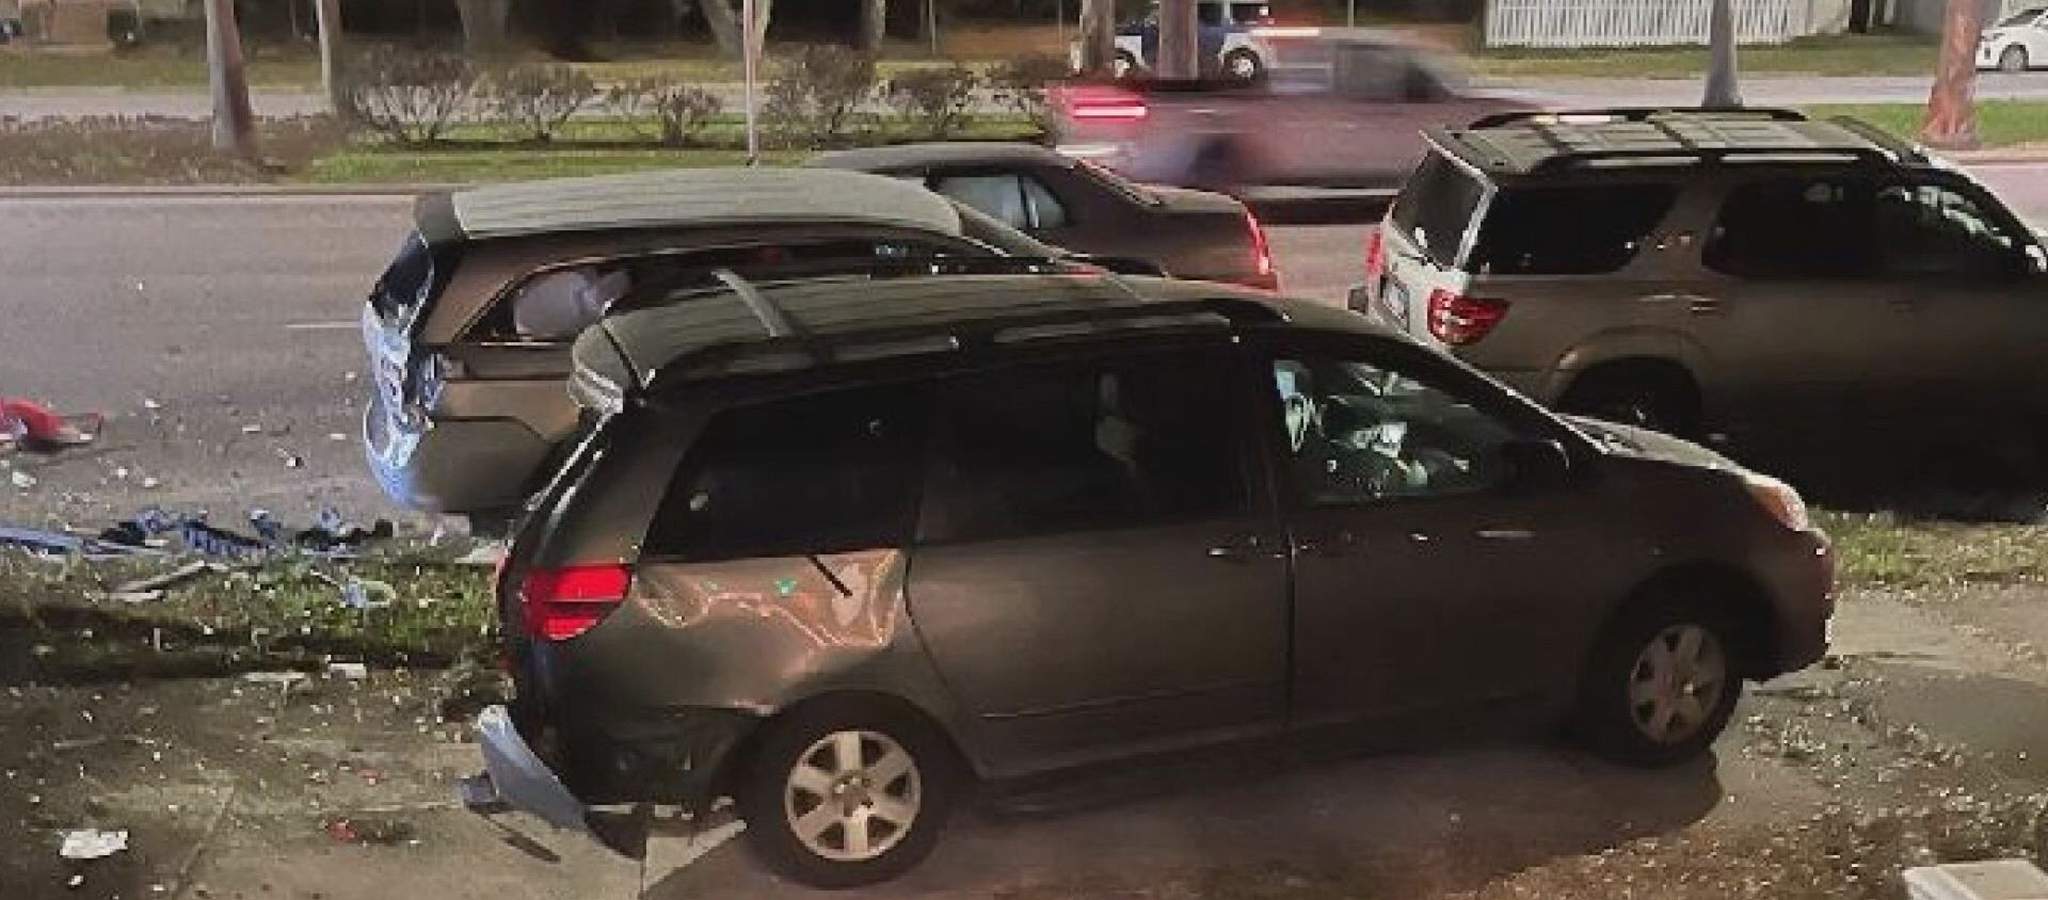 Caught on camera: Surveillance video shows driver slamming into several parked cars in Galveston